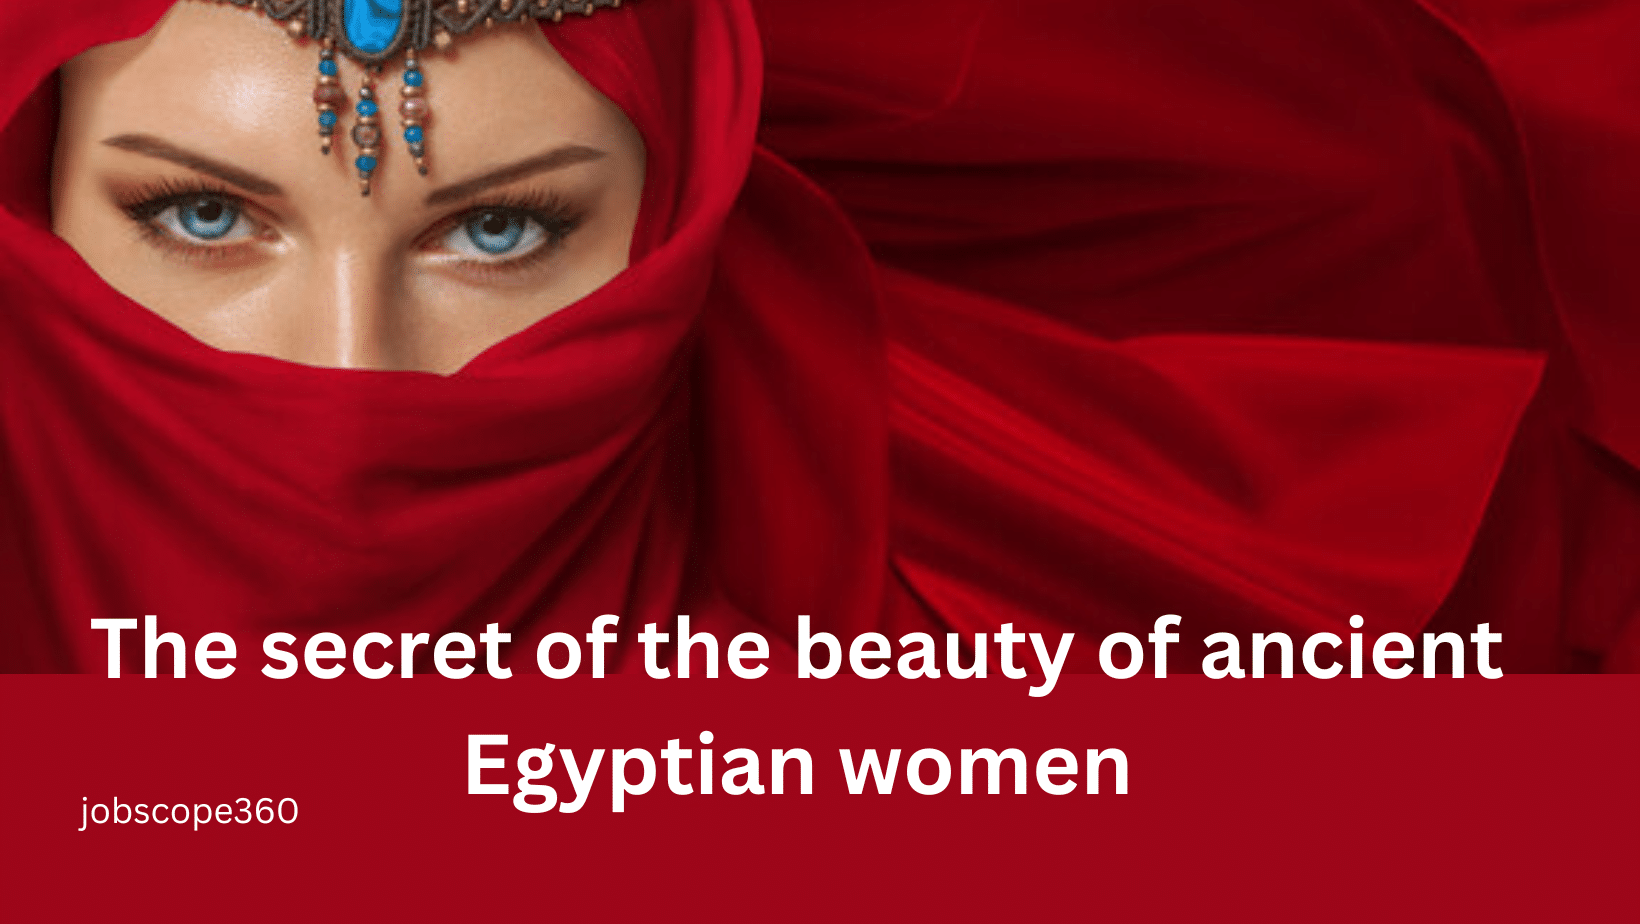 The secret of the beauty of ancient Egyptian women